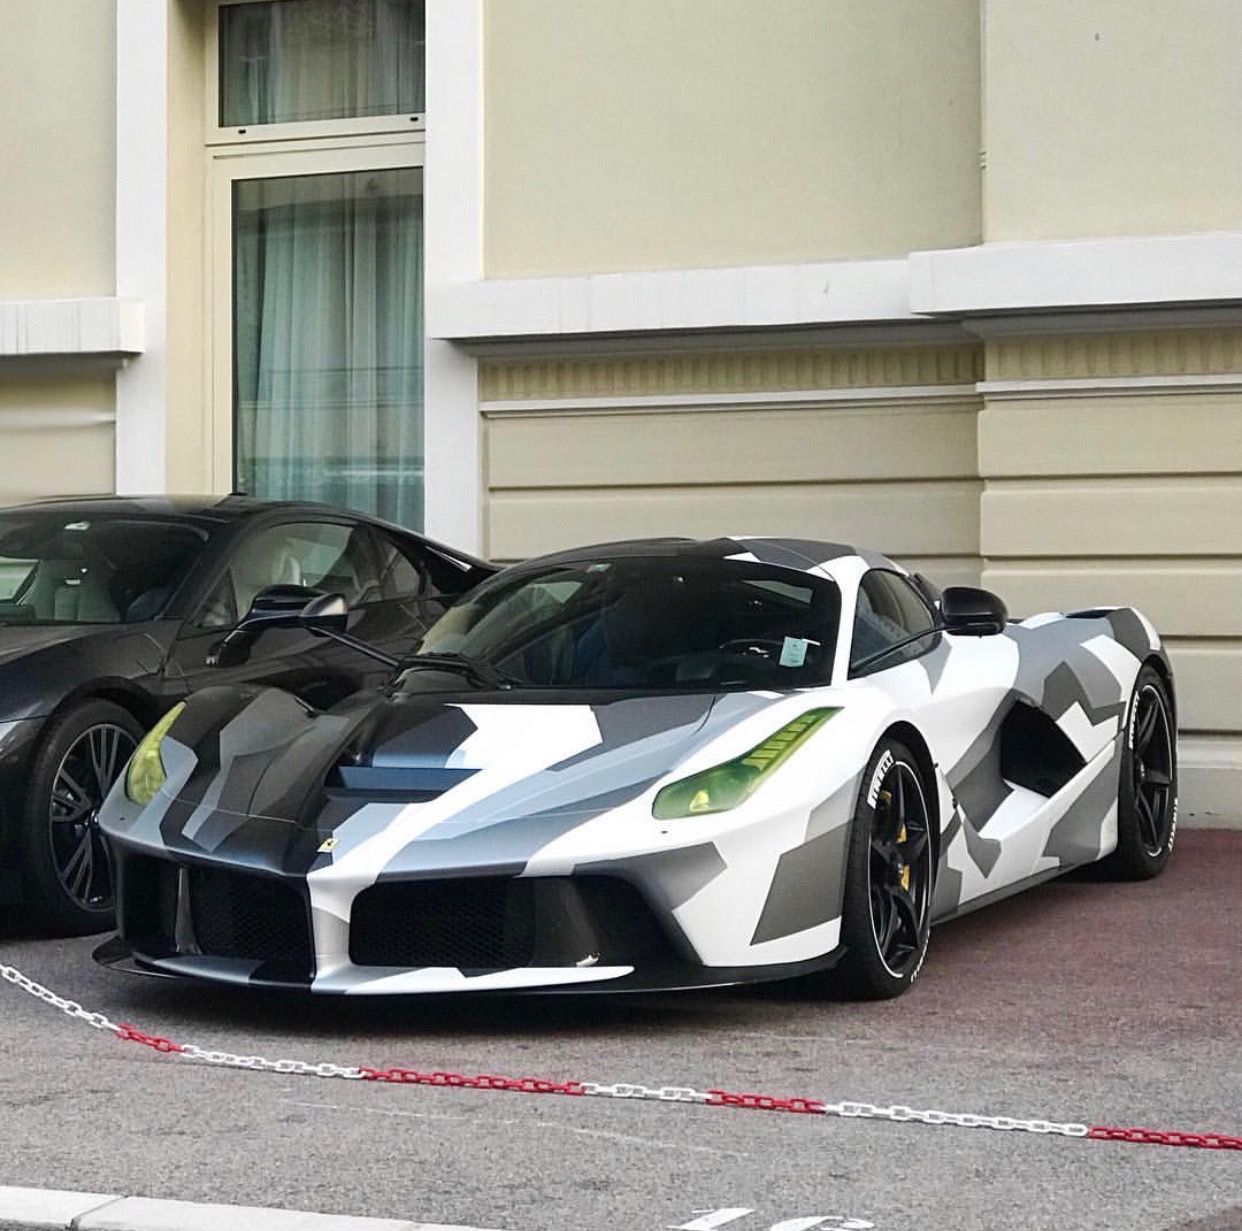 Ferrari LaFerrari painted in Grigio and wrapped in a Black, White and Gray rectangular camouflage Photo taken by:. Ferrari laferrari, La ferrari, Luxury cars